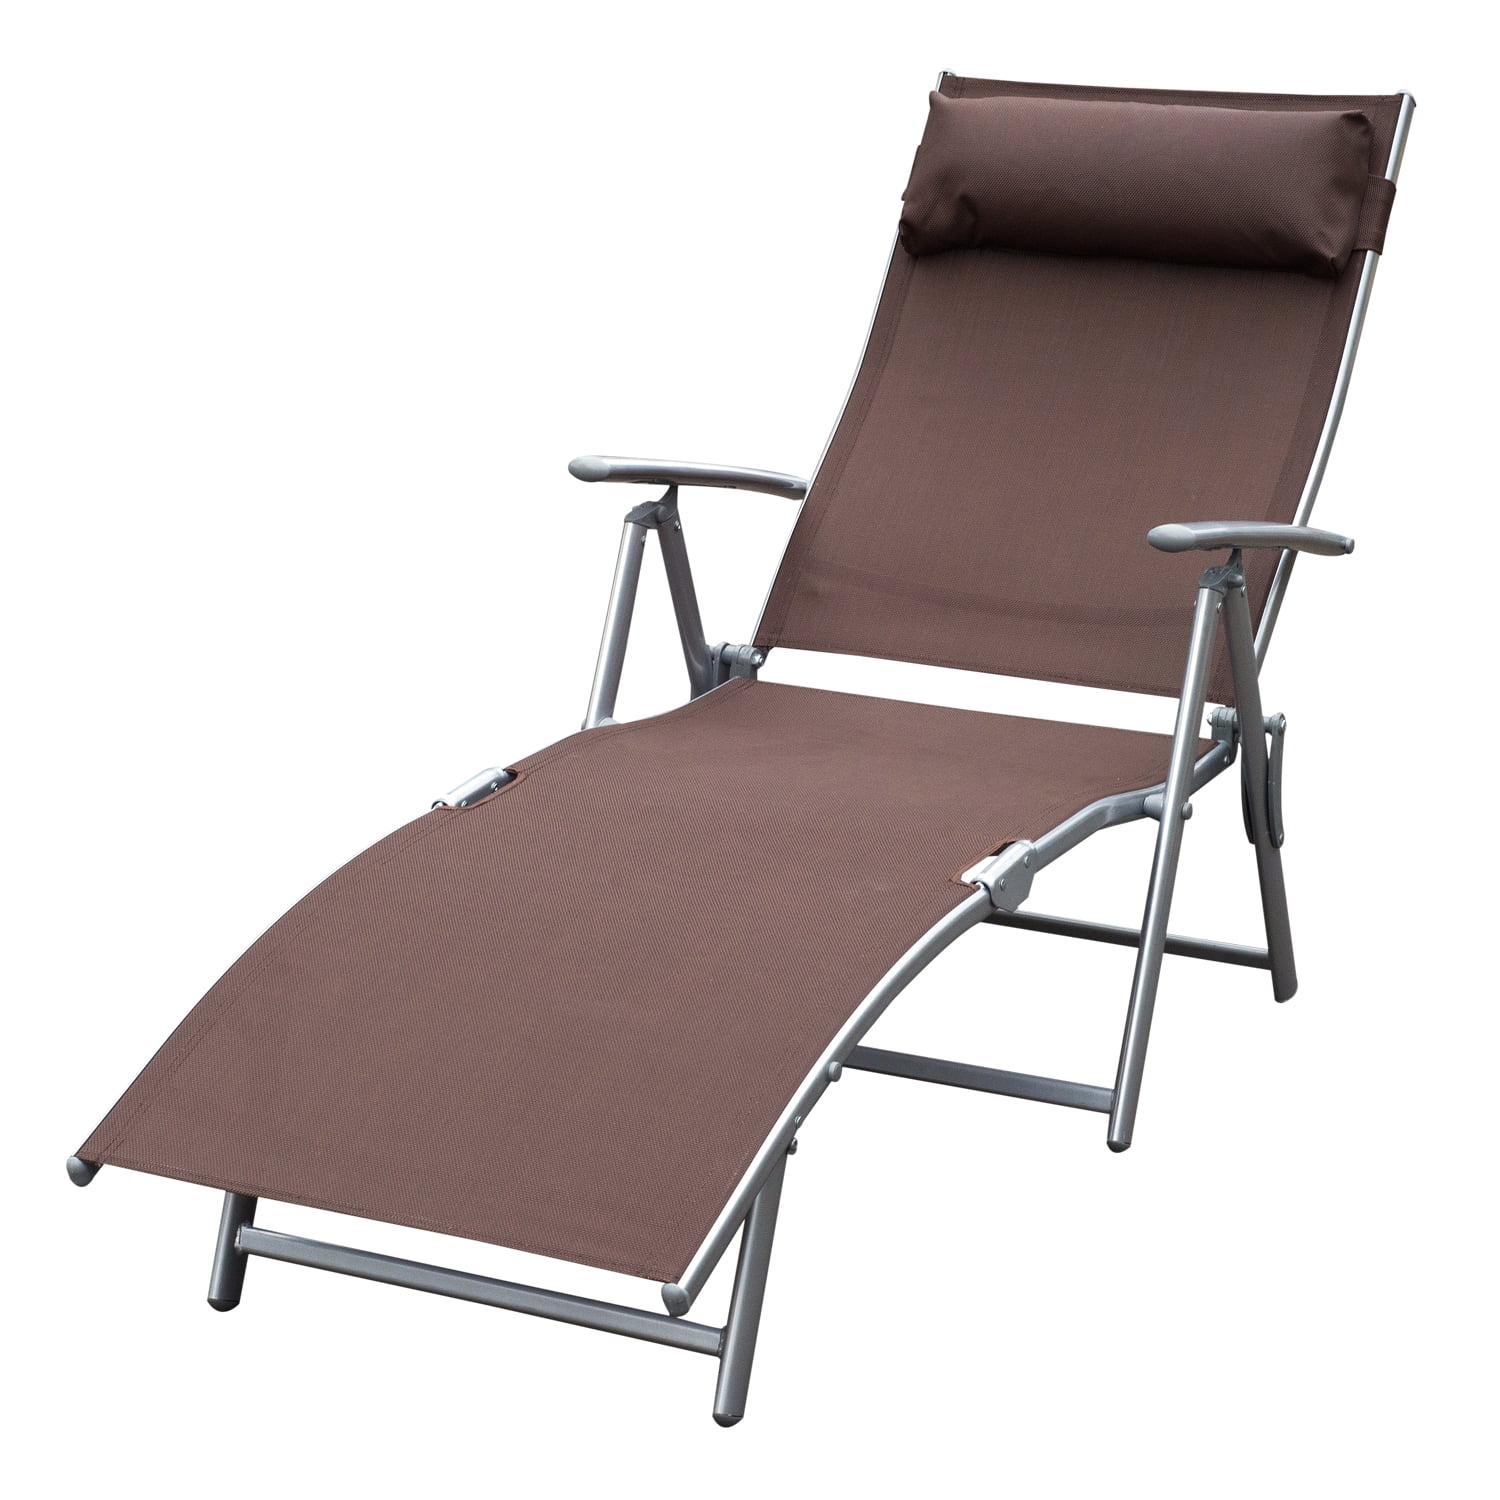 Outsunny Steel Fabric Outdoor Folding Chaise Lounge Chair Recliner with